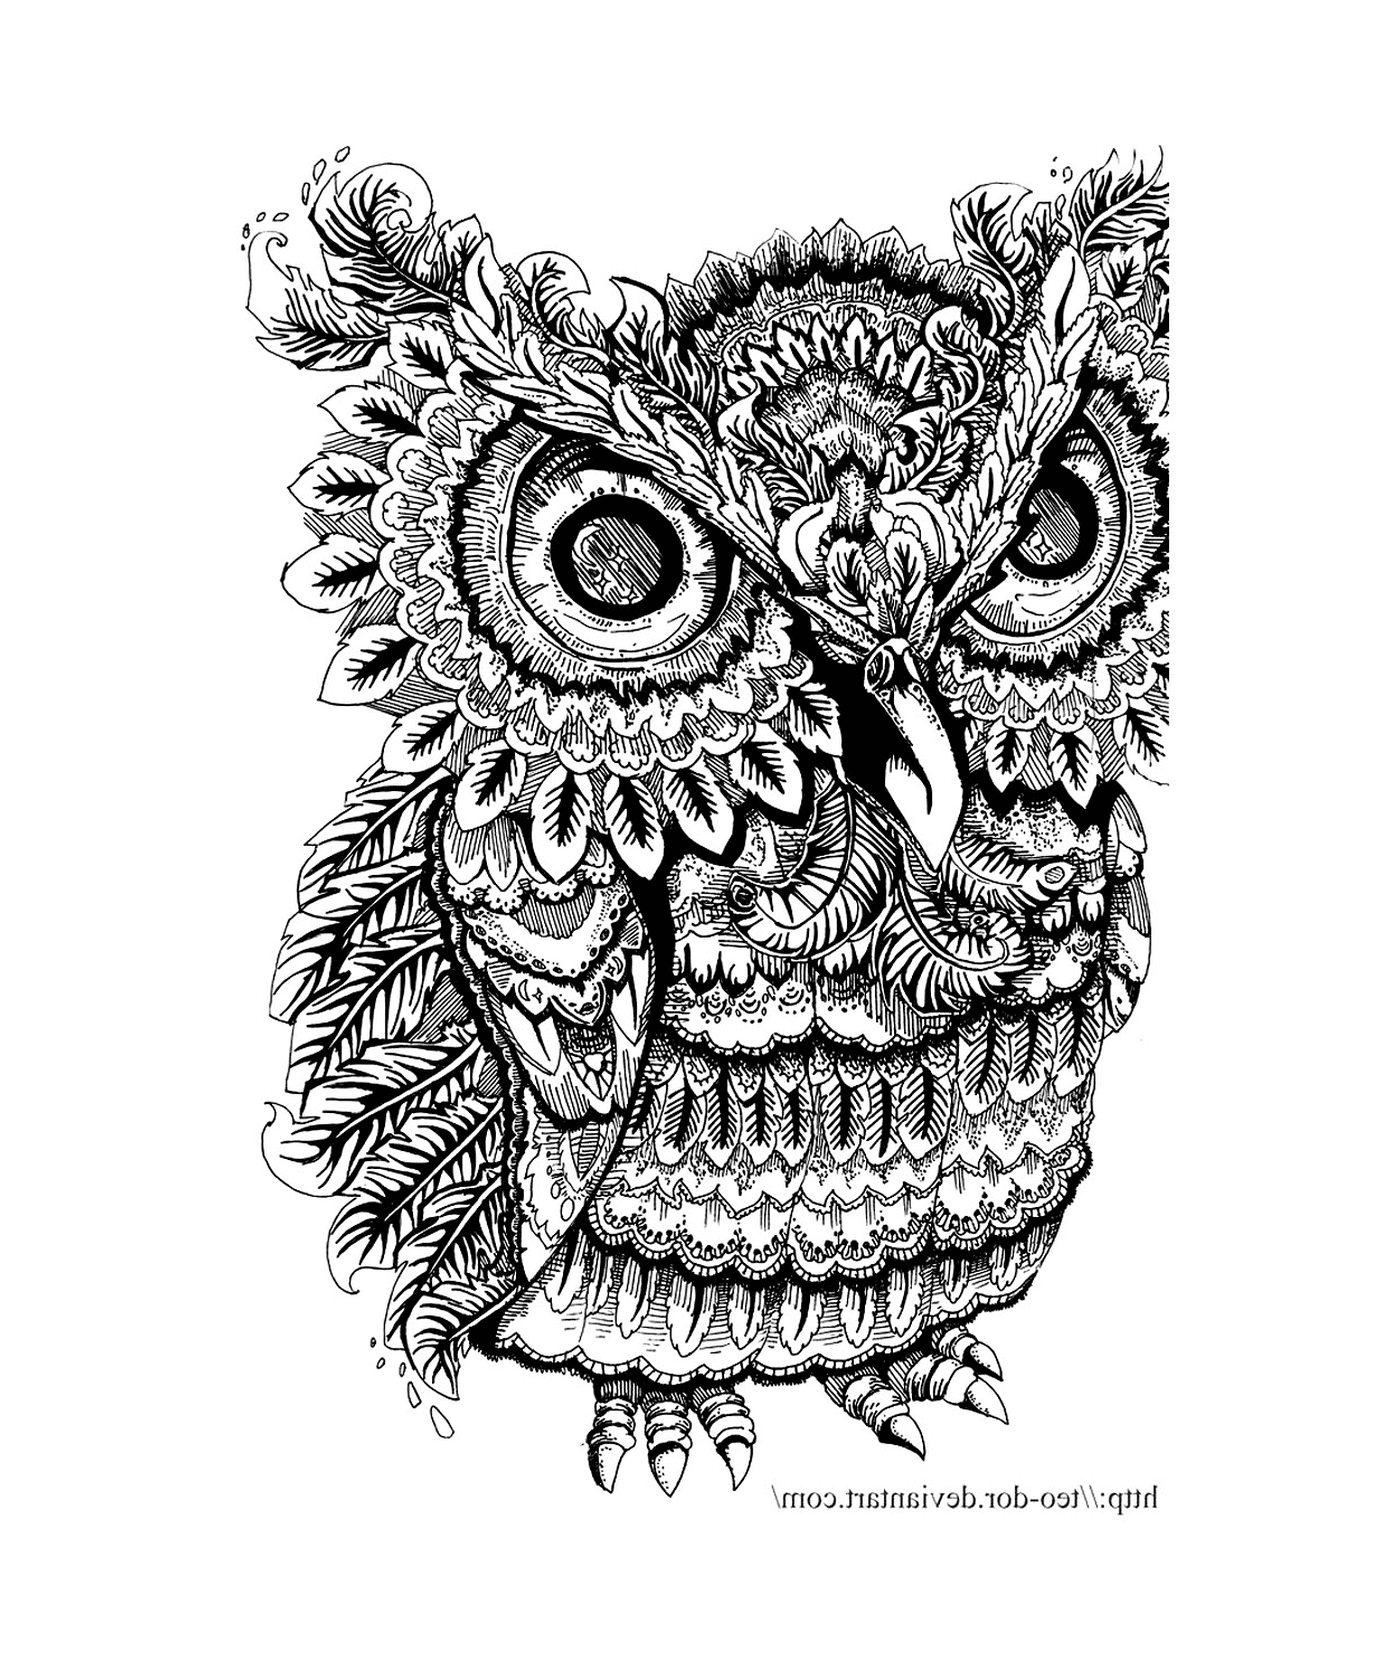  An owl is drawn with big eyes 